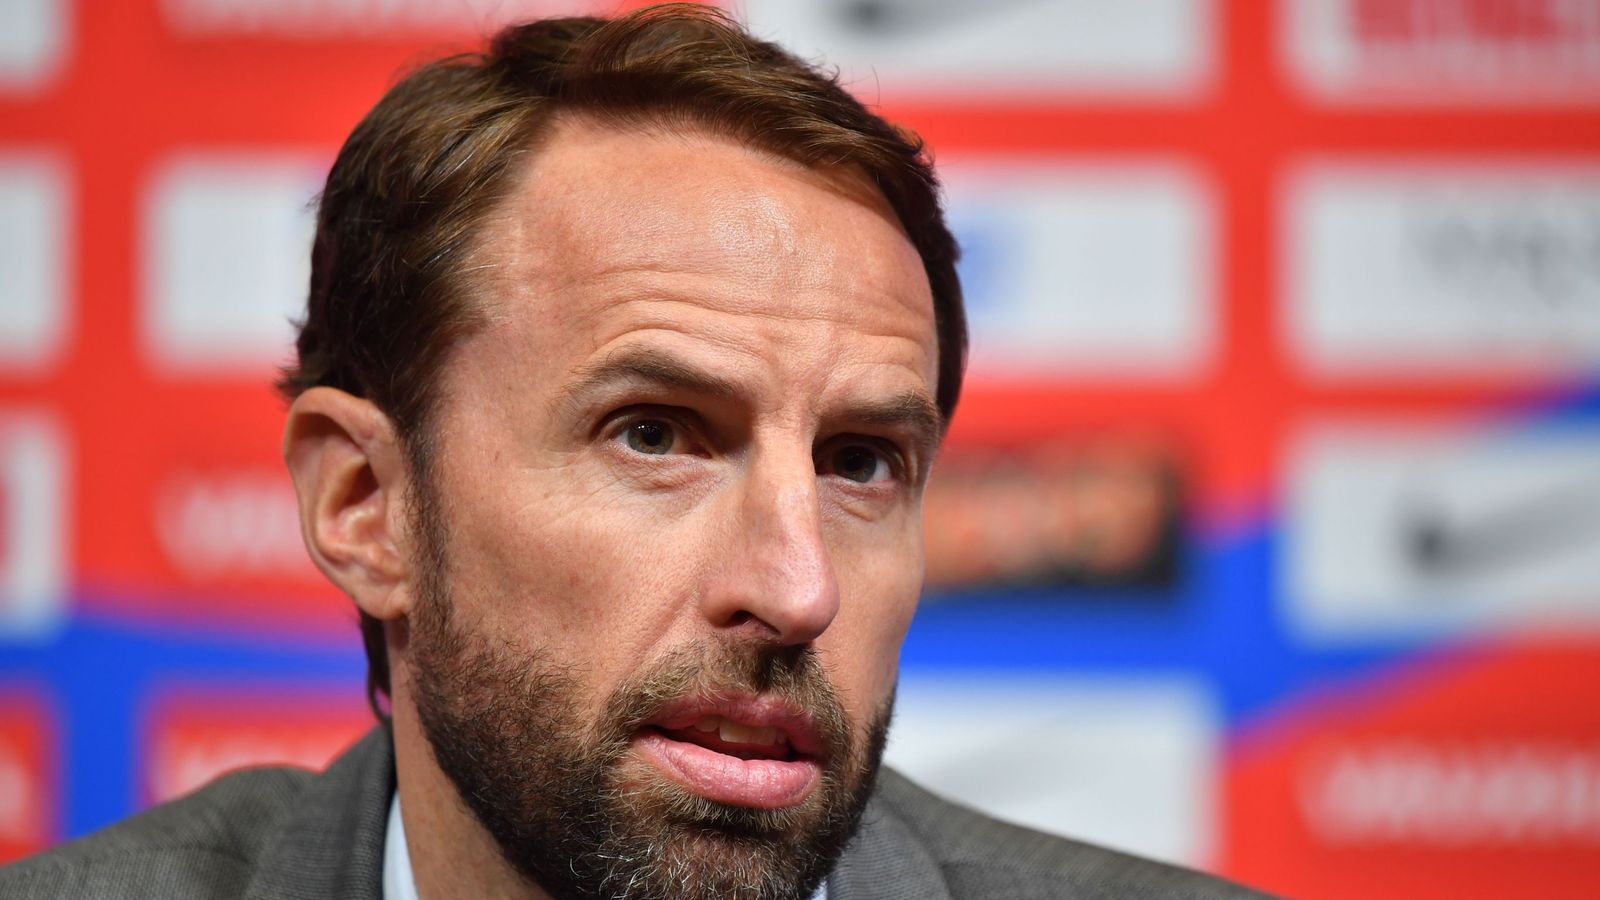 England World Cup squad: What we learnt from Gareth Southgate's